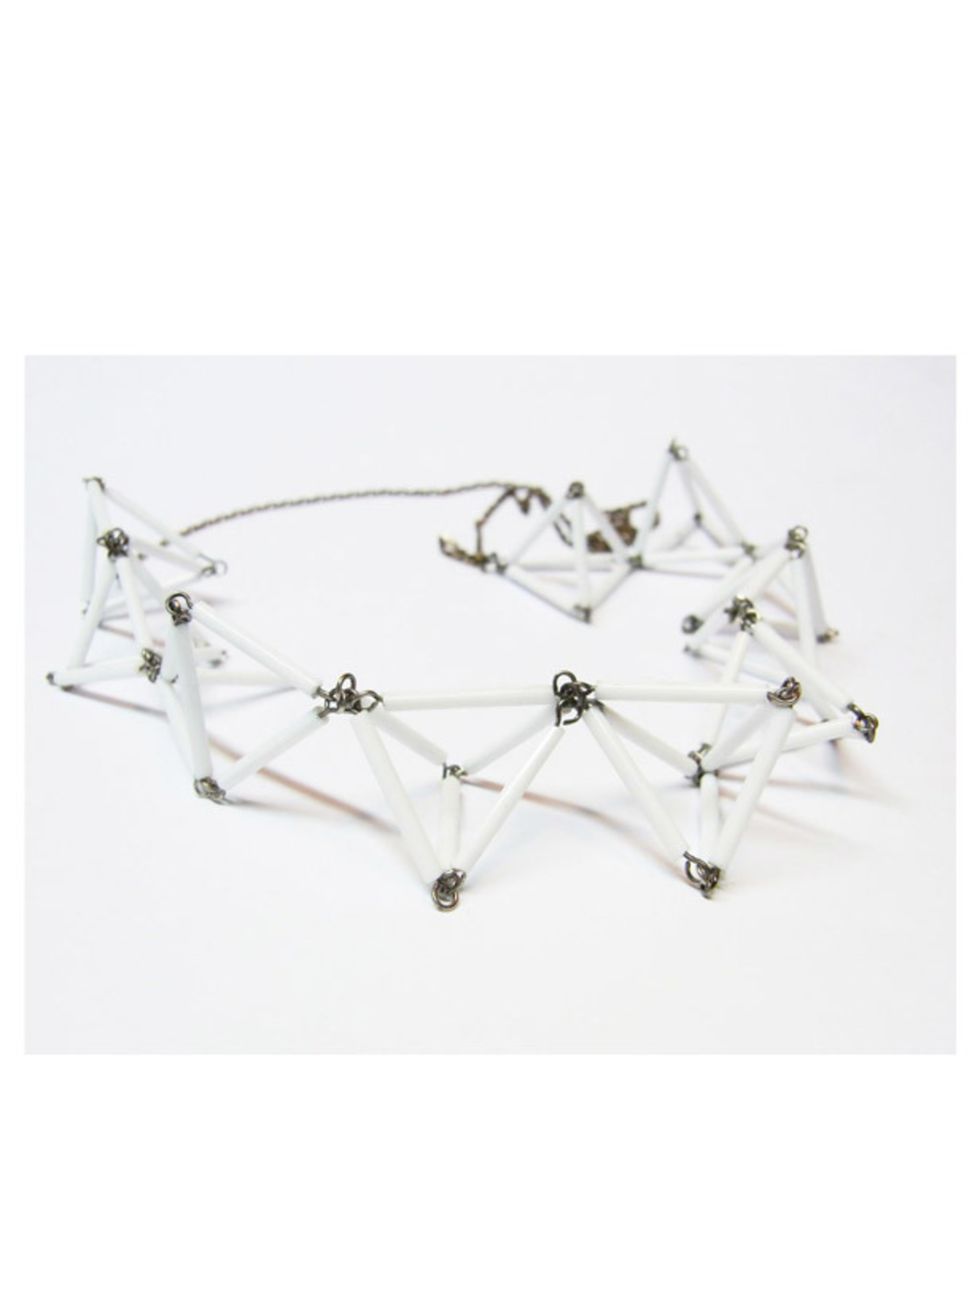 <p>Geometric glass bead necklace, £35, by LEM_NIS_CUS at <a href="http://shop.notjustalabel.com/accessories/1867">NotJustALabel </a></p>